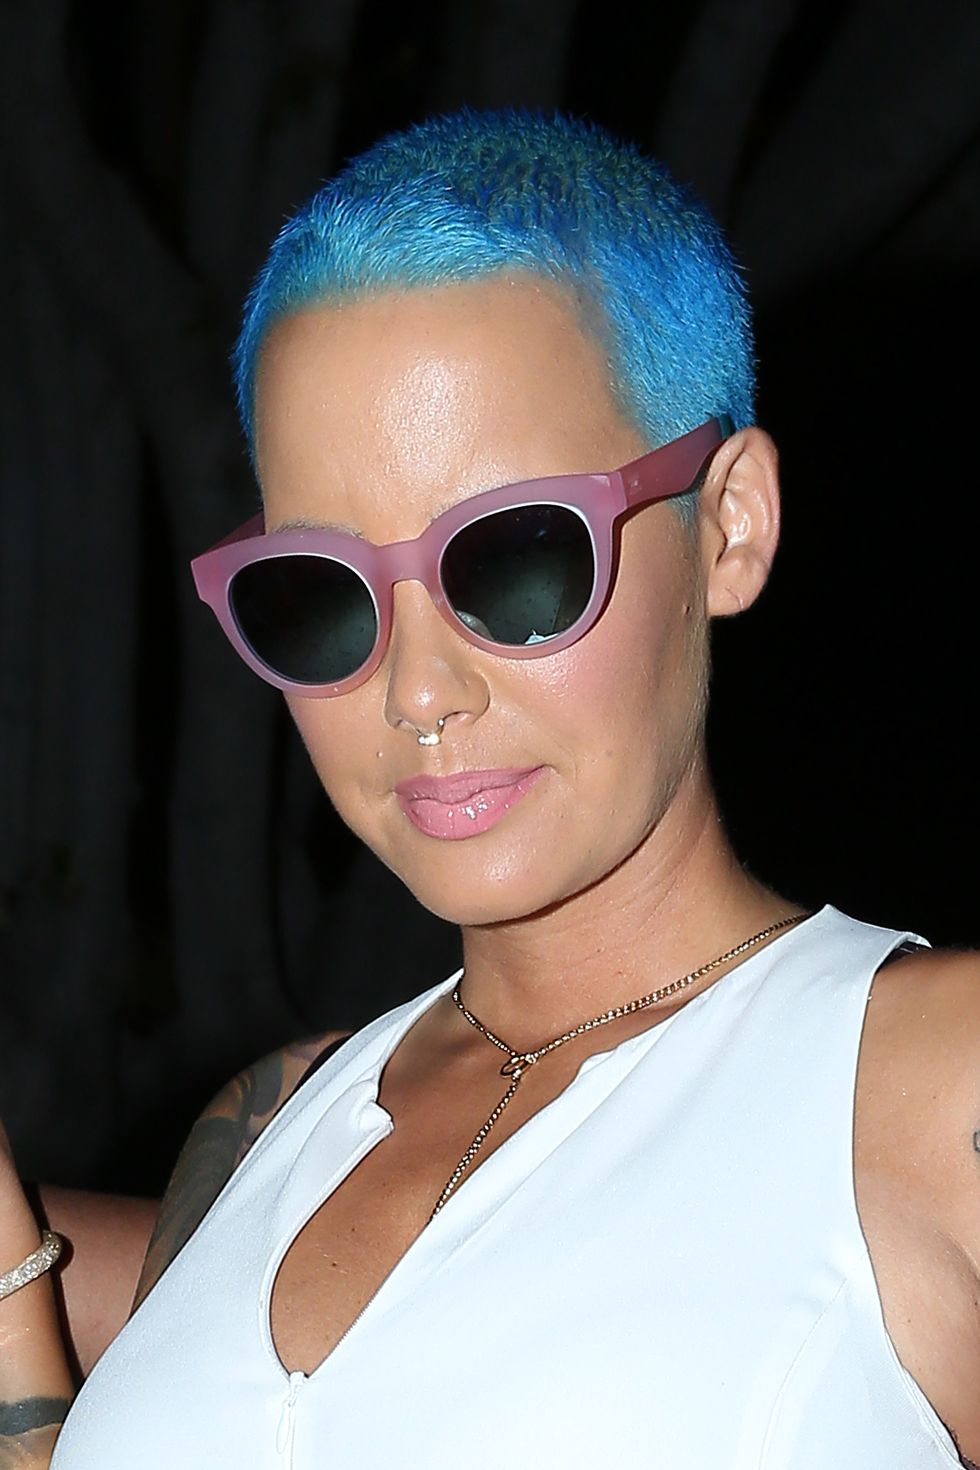 Amber Rose has blue hair now